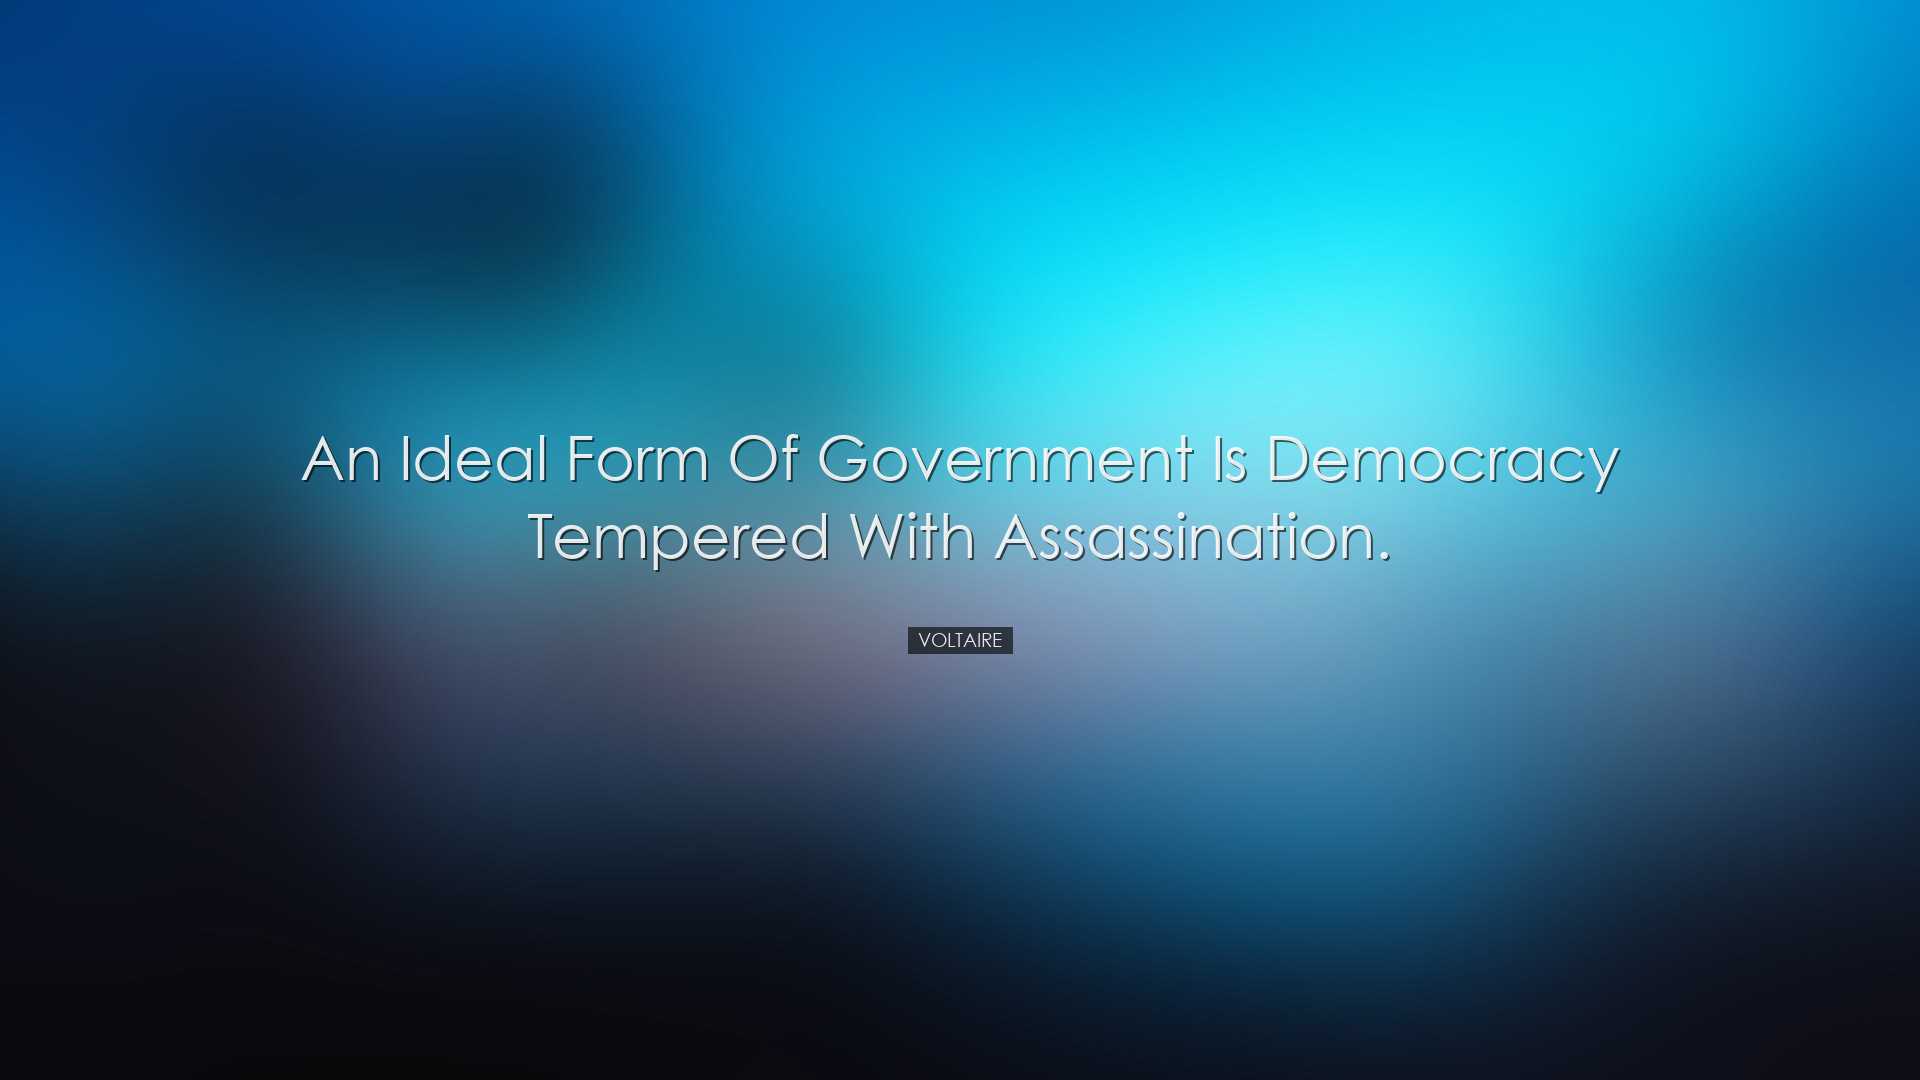 An ideal form of government is democracy tempered with assassinati